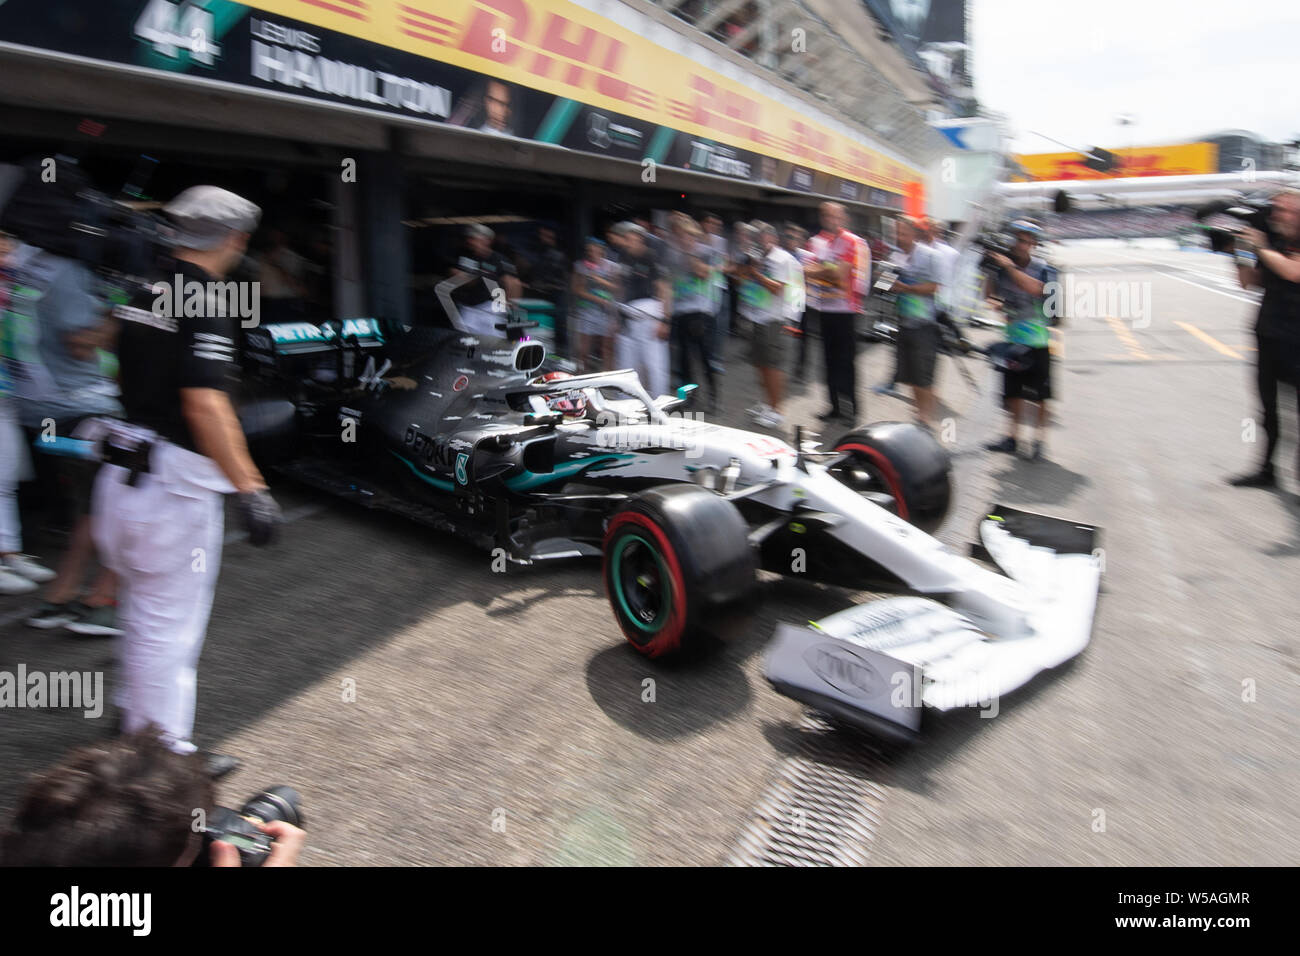 Hockenheim, Germany. 27th July, 2019. Motorsport: Formula 1 World Championship, Grand Prix of Germany. Lewis Hamilton from Great Britain of the Mercedes-AMG Petronas team drives in the pit lane during the third free practice session. Credit: Sebastian Gollnow/dpa/Alamy Live News Stock Photo